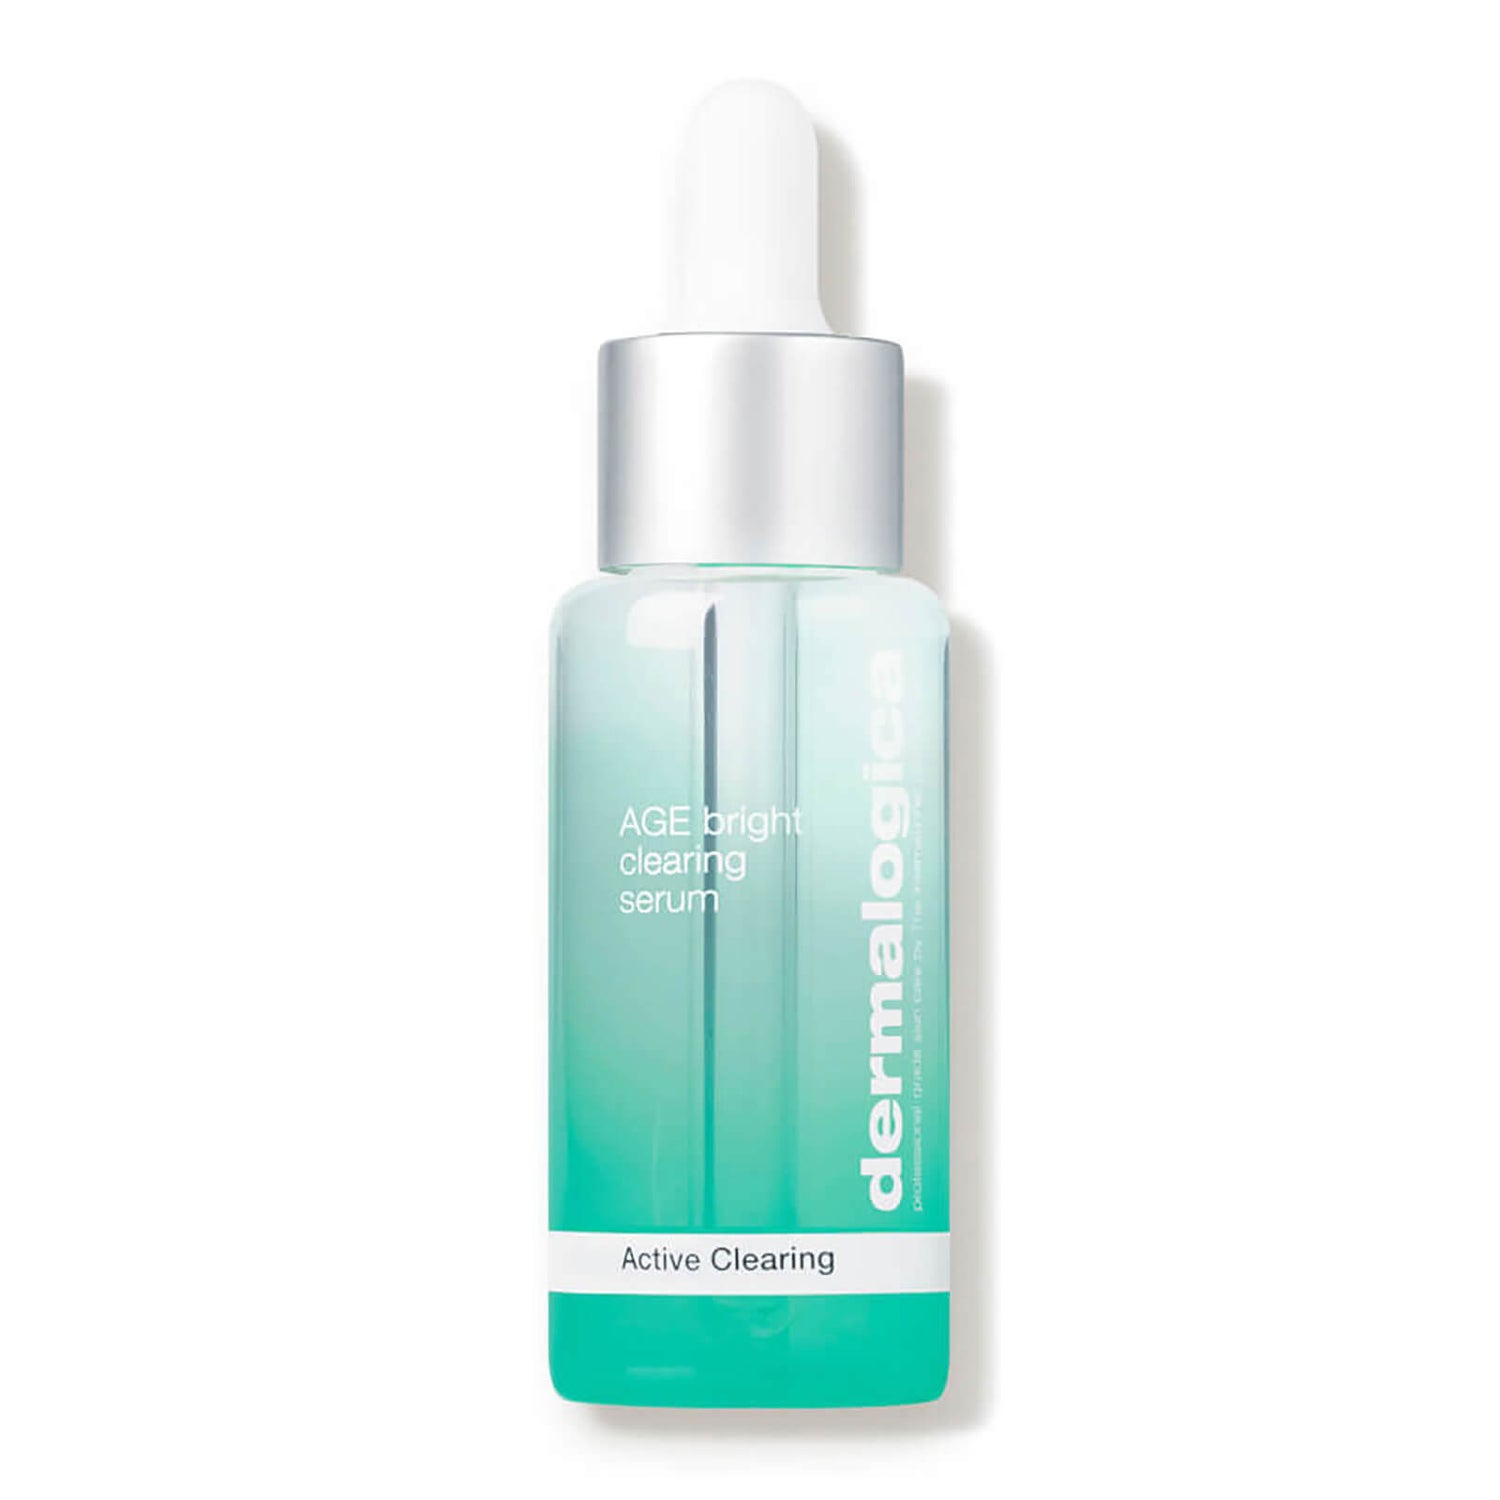 Dermalogica Active Clearing AGE Bright Clearing Serum 1 oz